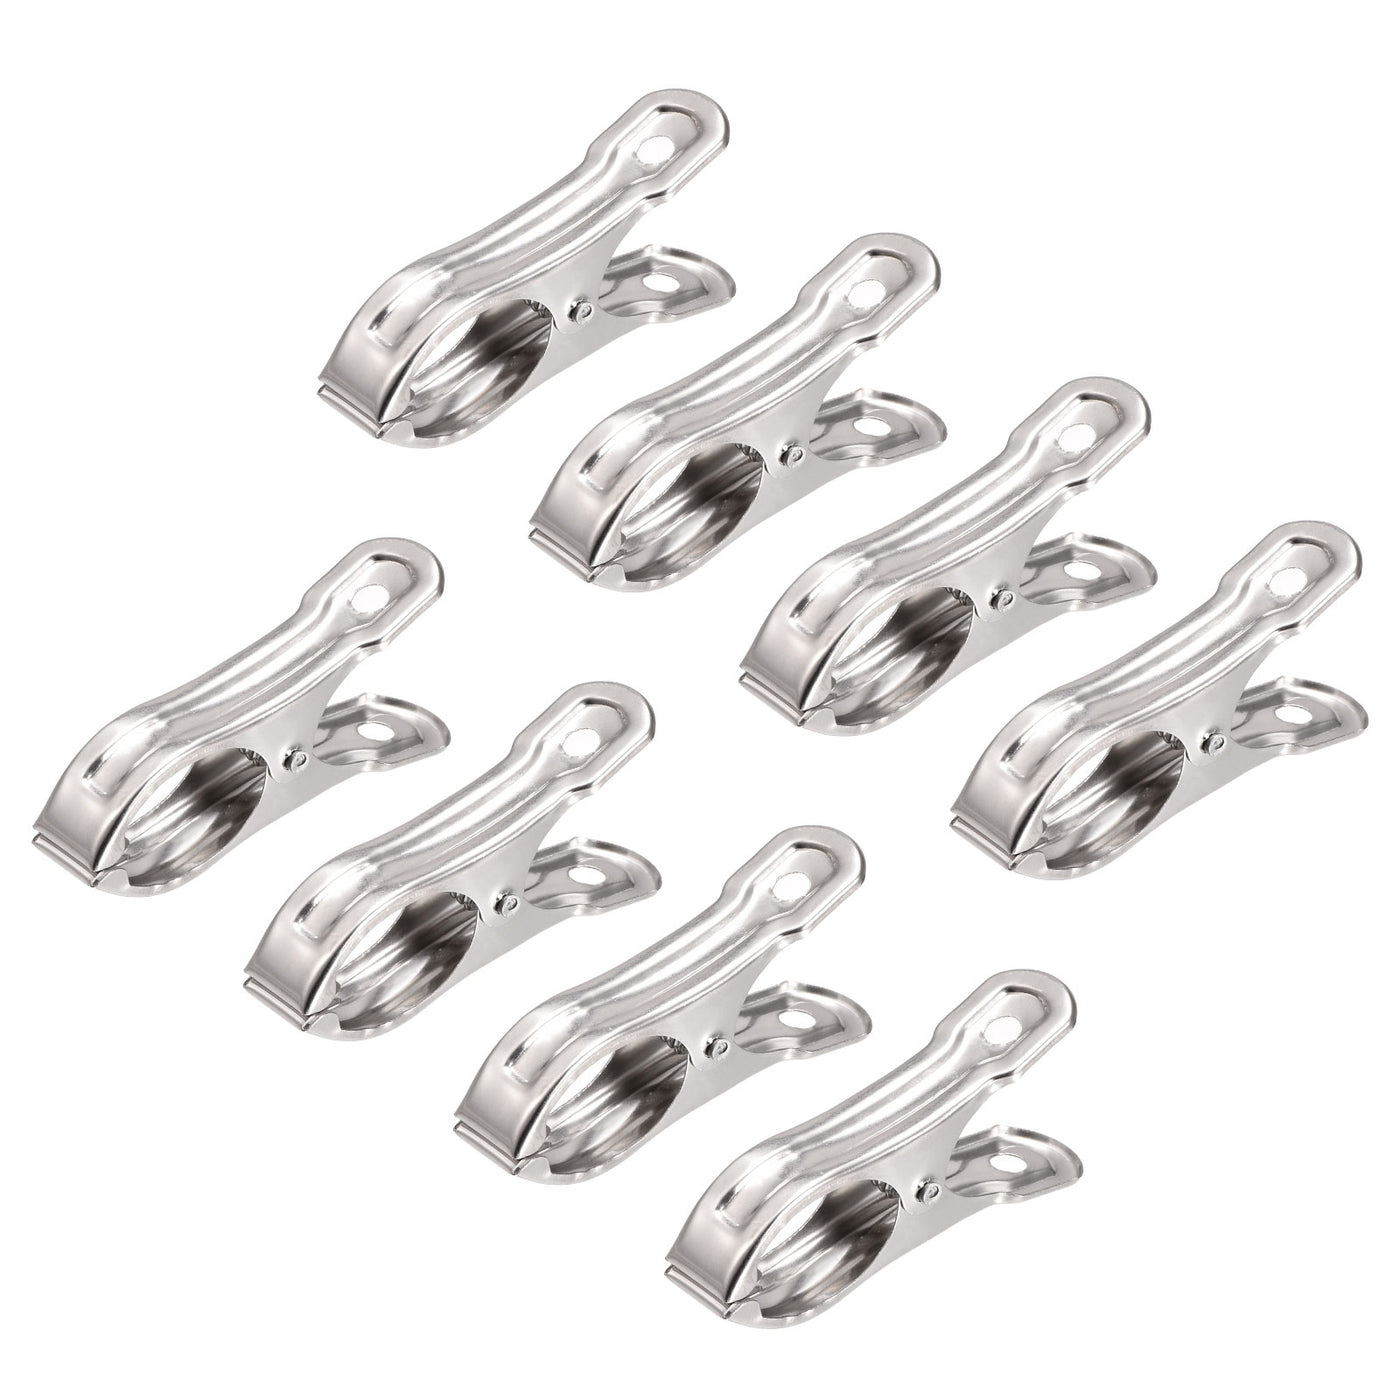 uxcell Uxcell Tablecloth Clips - 55mm Stainless Steel Clamps for Fixing Table Cloth Hanging Clothes, 24 Pcs